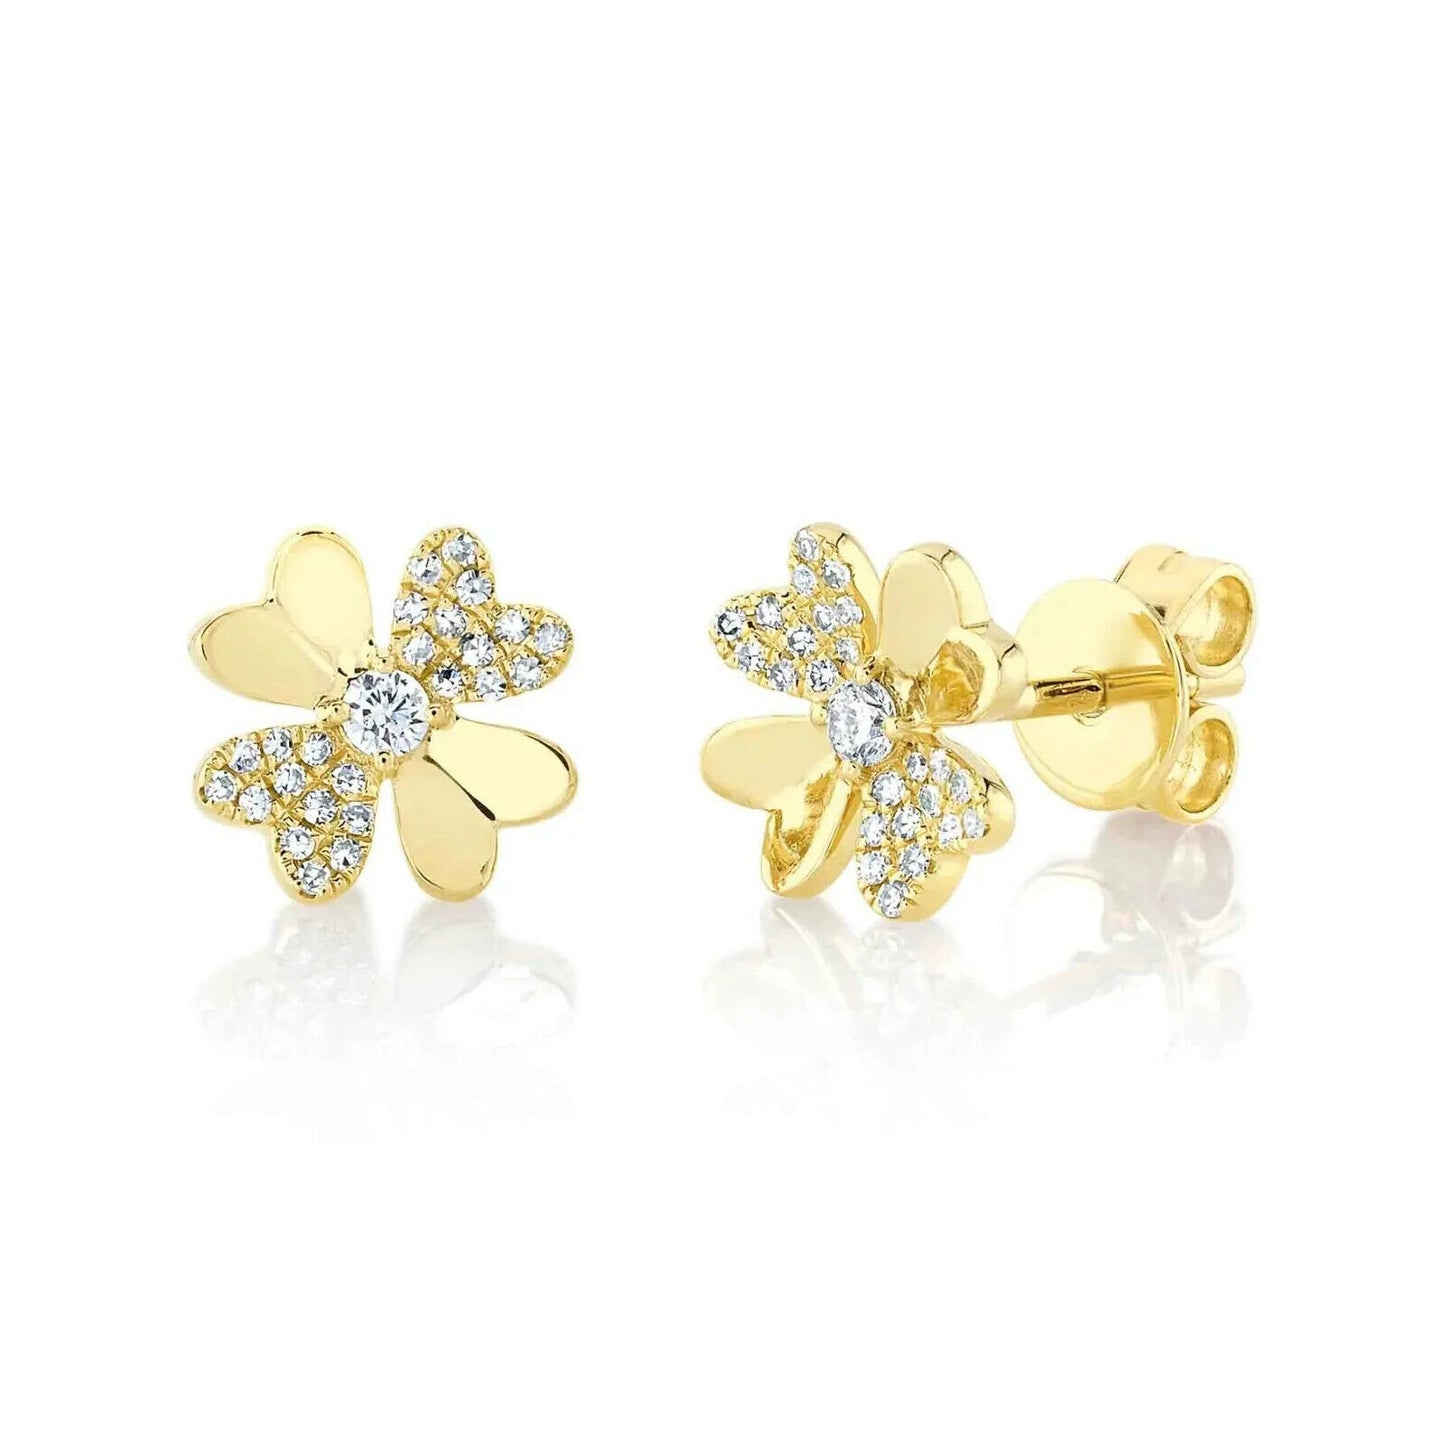 14K Gold 0.14 CT Diamond Clover Stud Earrings Round Cut Natural Pushback